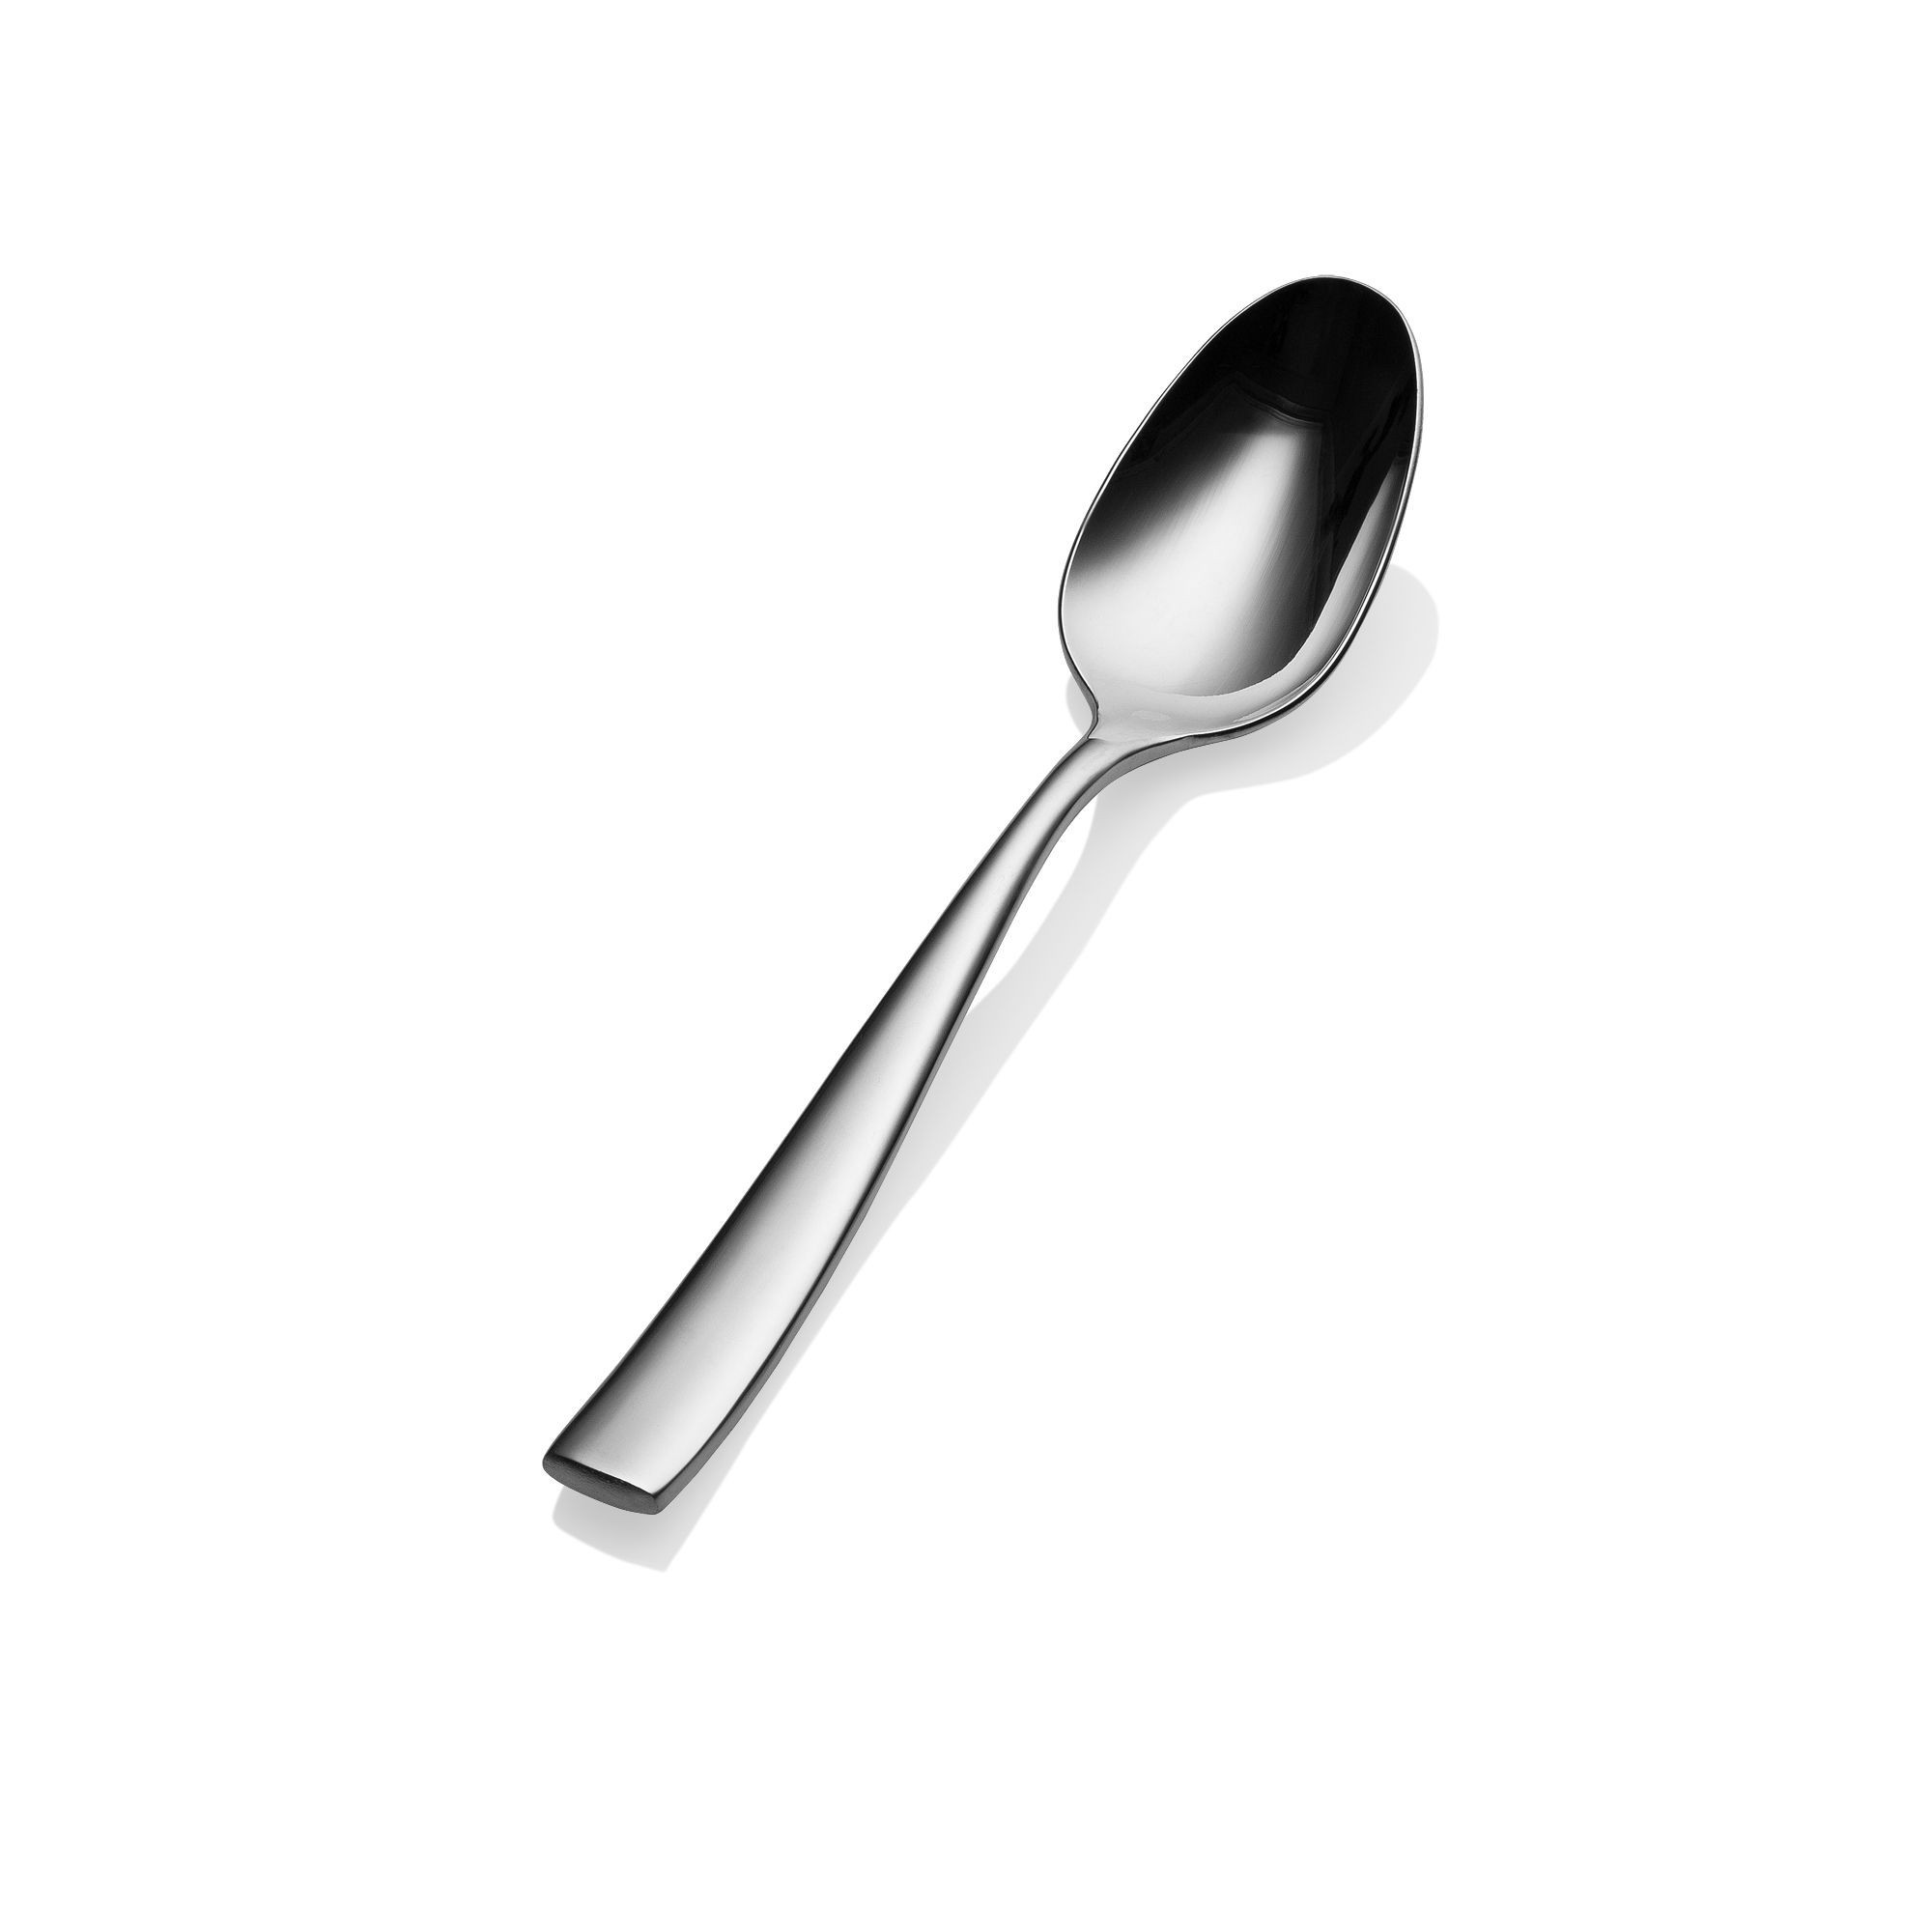 Bon Chef S3003S Manhattan 18/8 Stainless Steel Silverplated Soup and Dessert Spoon